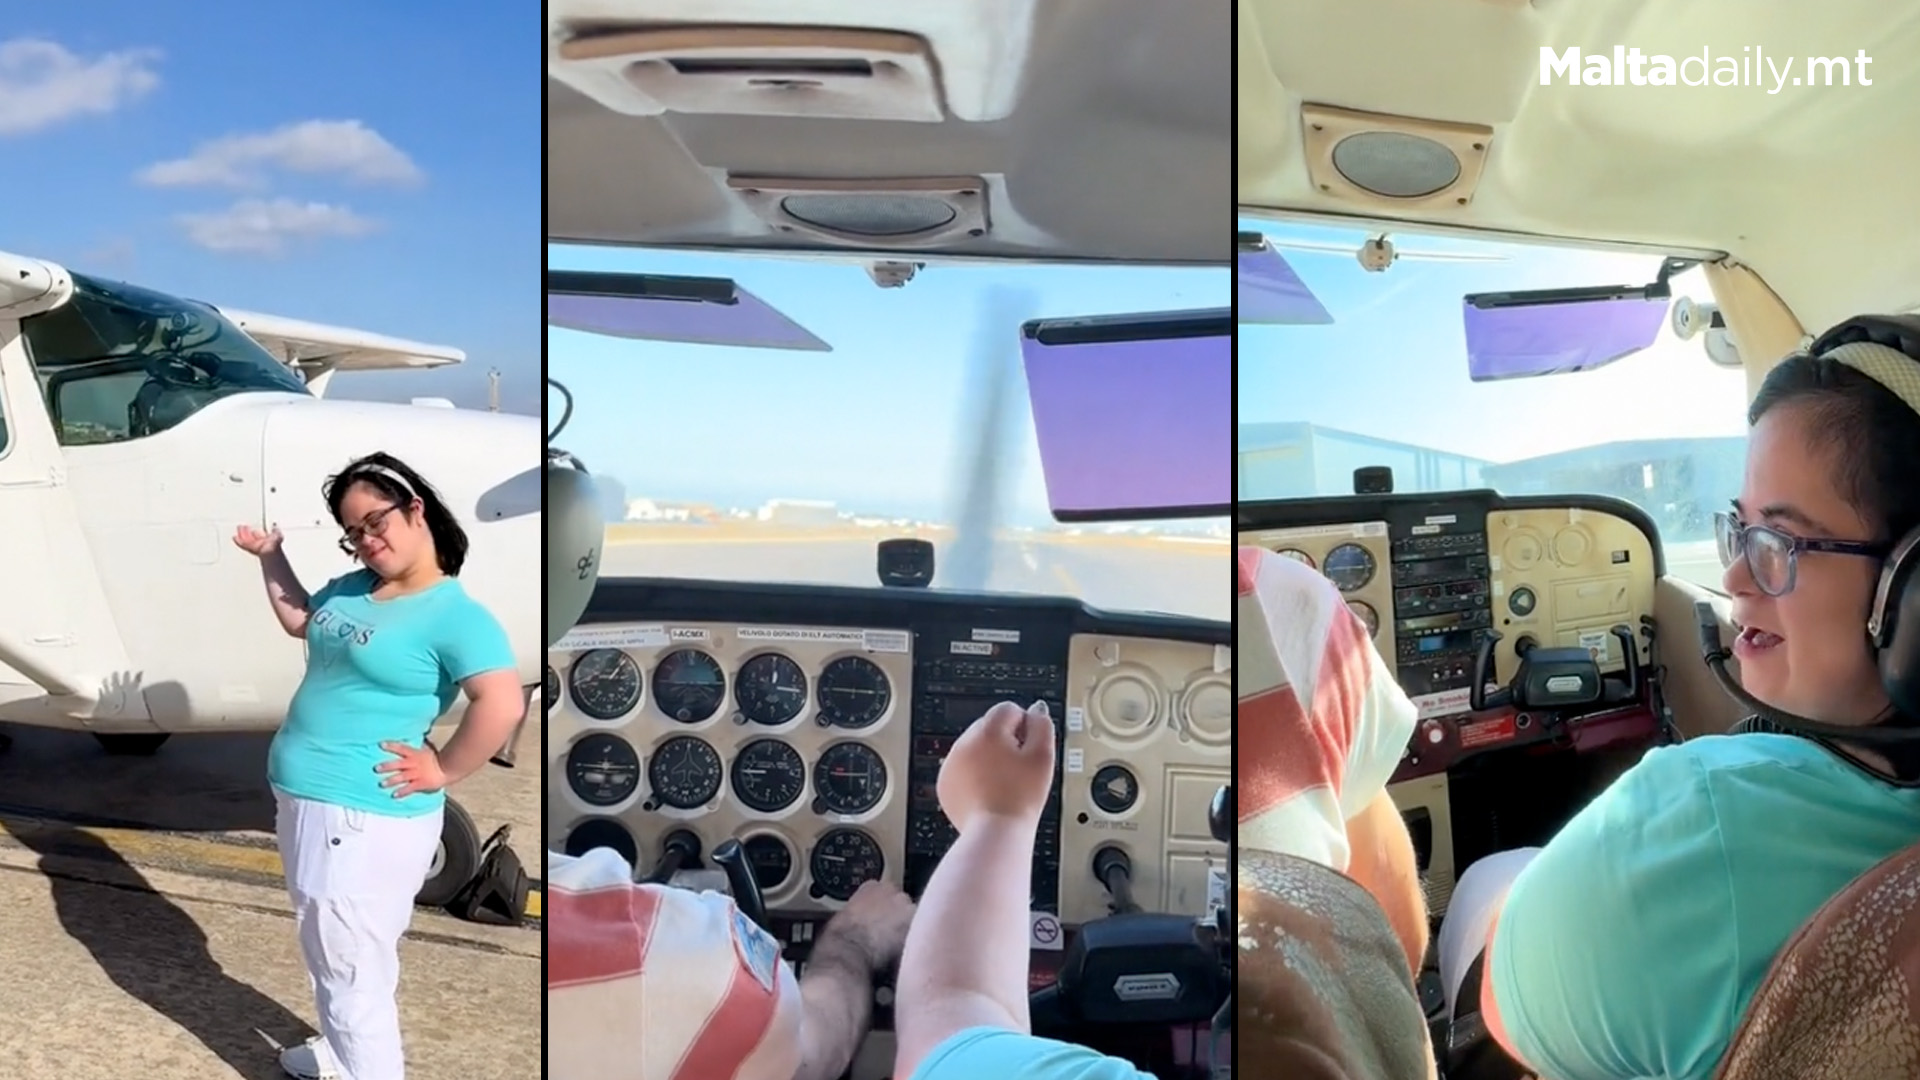 Siblings Take Cousin On Plane Ride For Her Birthday